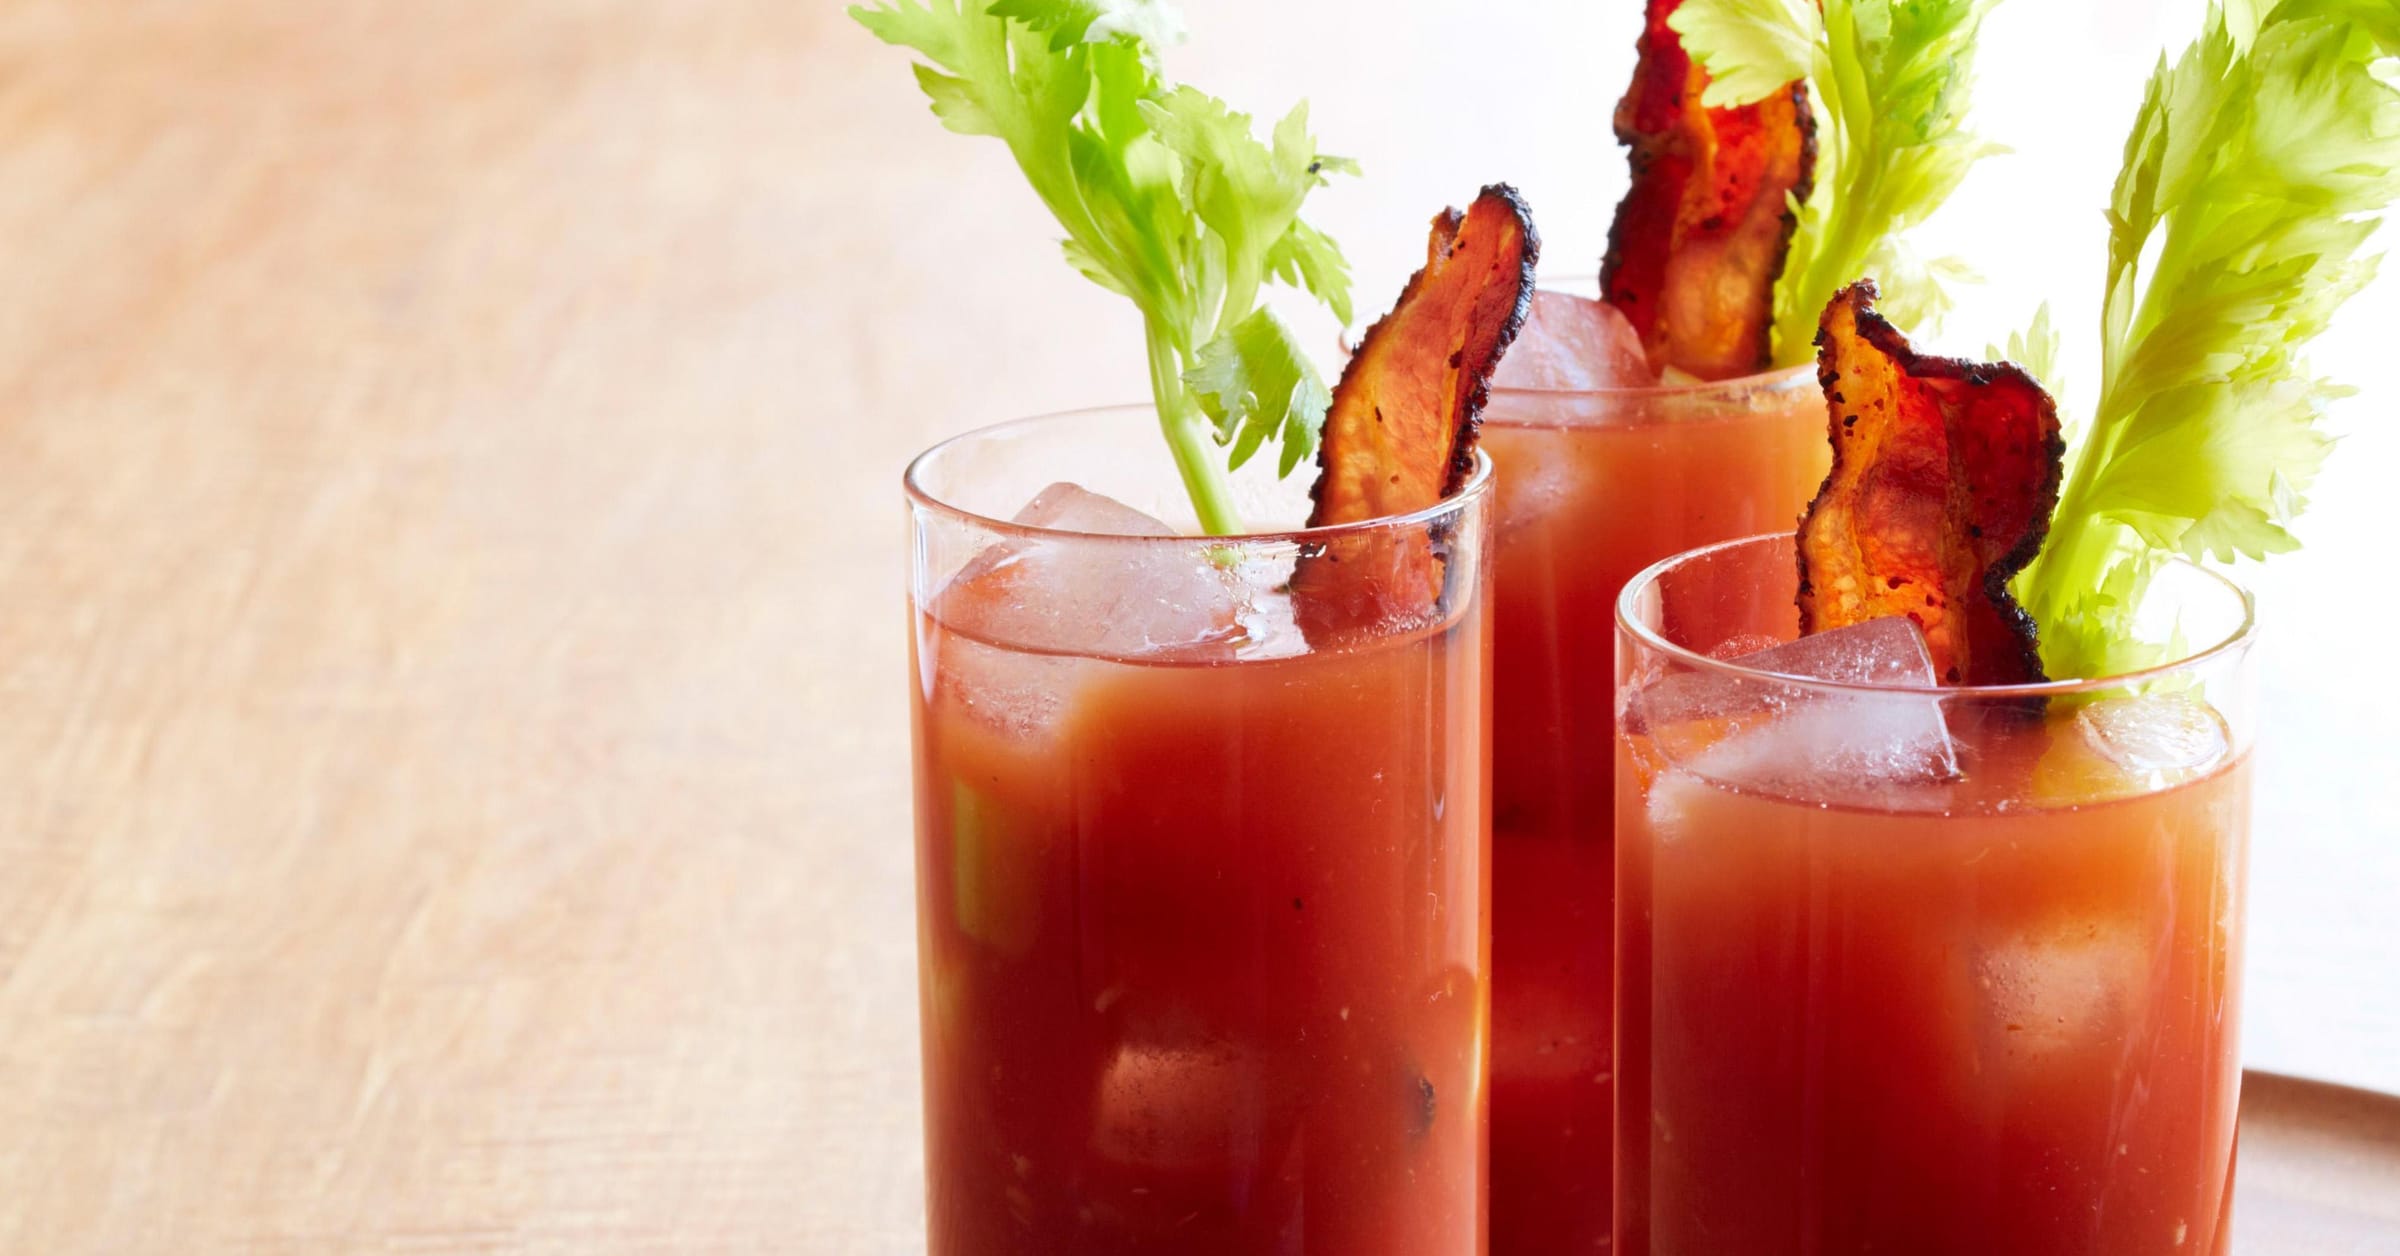 Best Hangover Cure: 20 Ways to Cure a Hangover Tested and Ranked